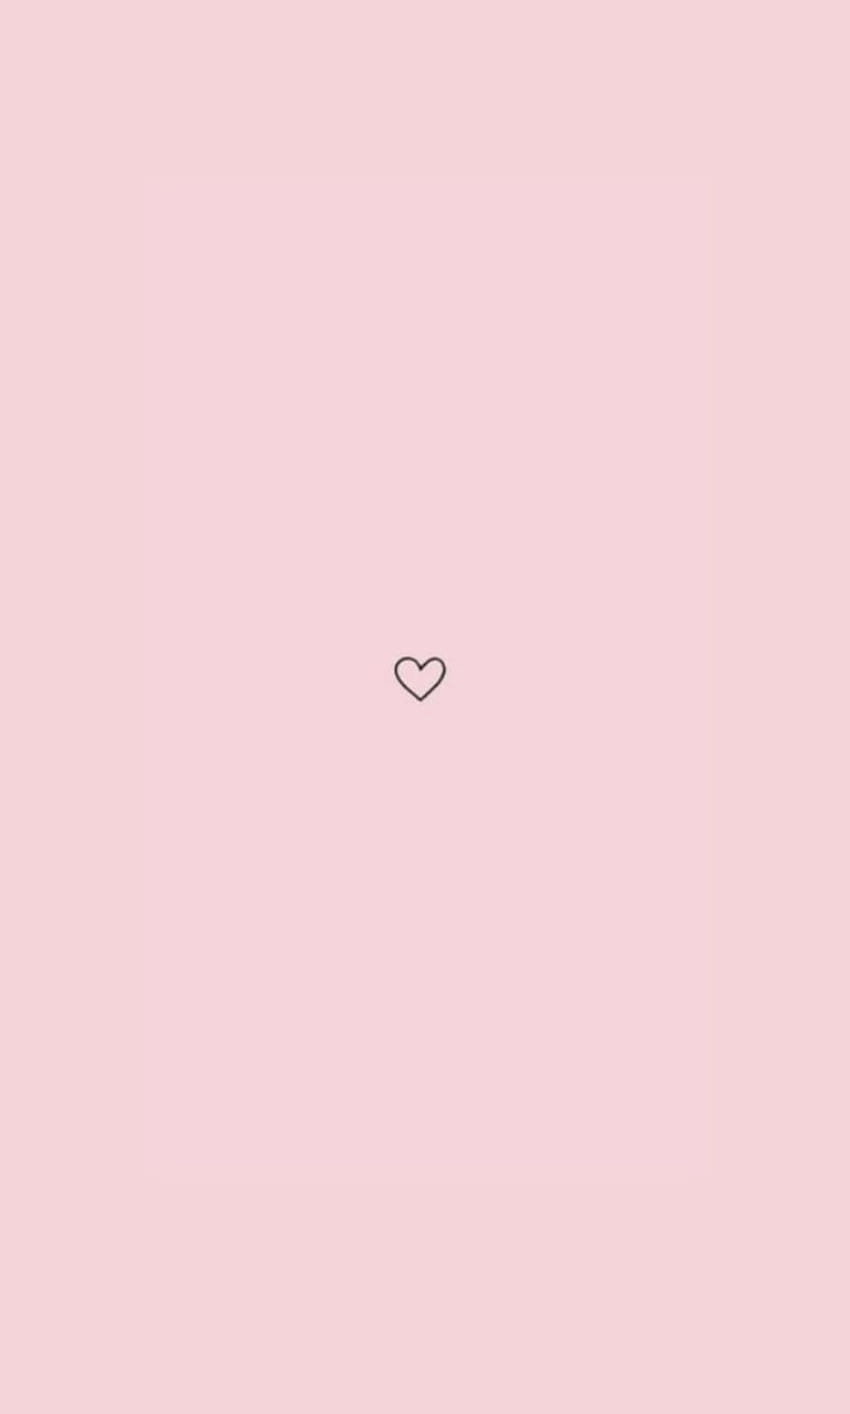 Light baby pink, soft pink aesthetic HD phone wallpaper